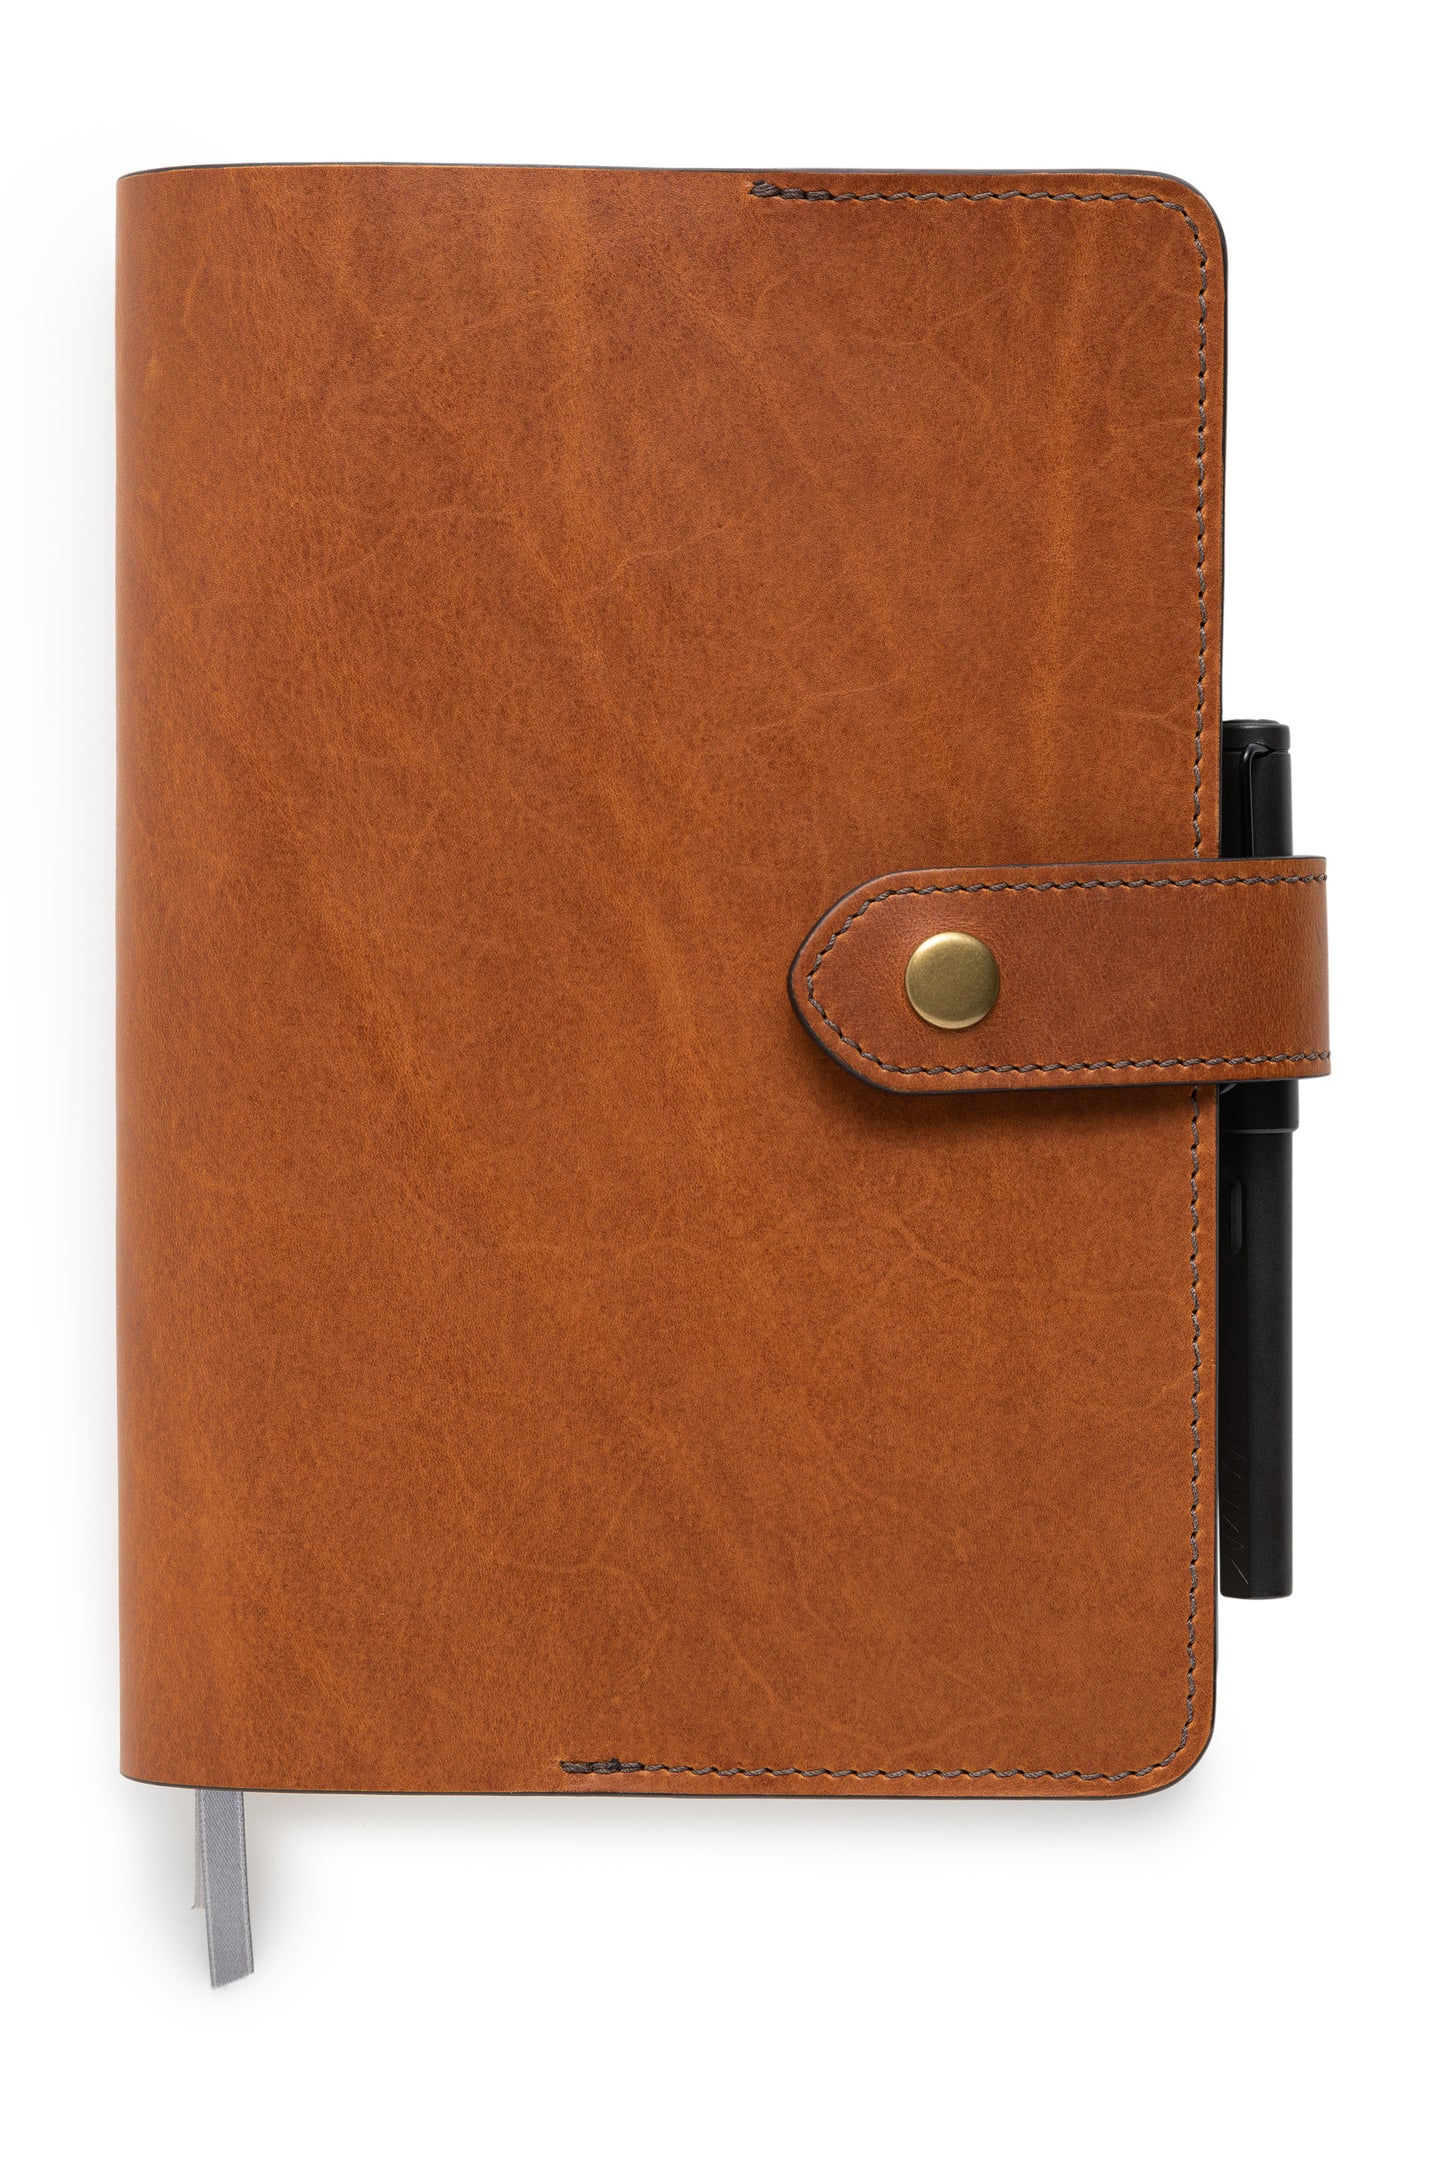 full grain leather planner cover to fit full focus planner by Michael Hyatt in saddle tan front